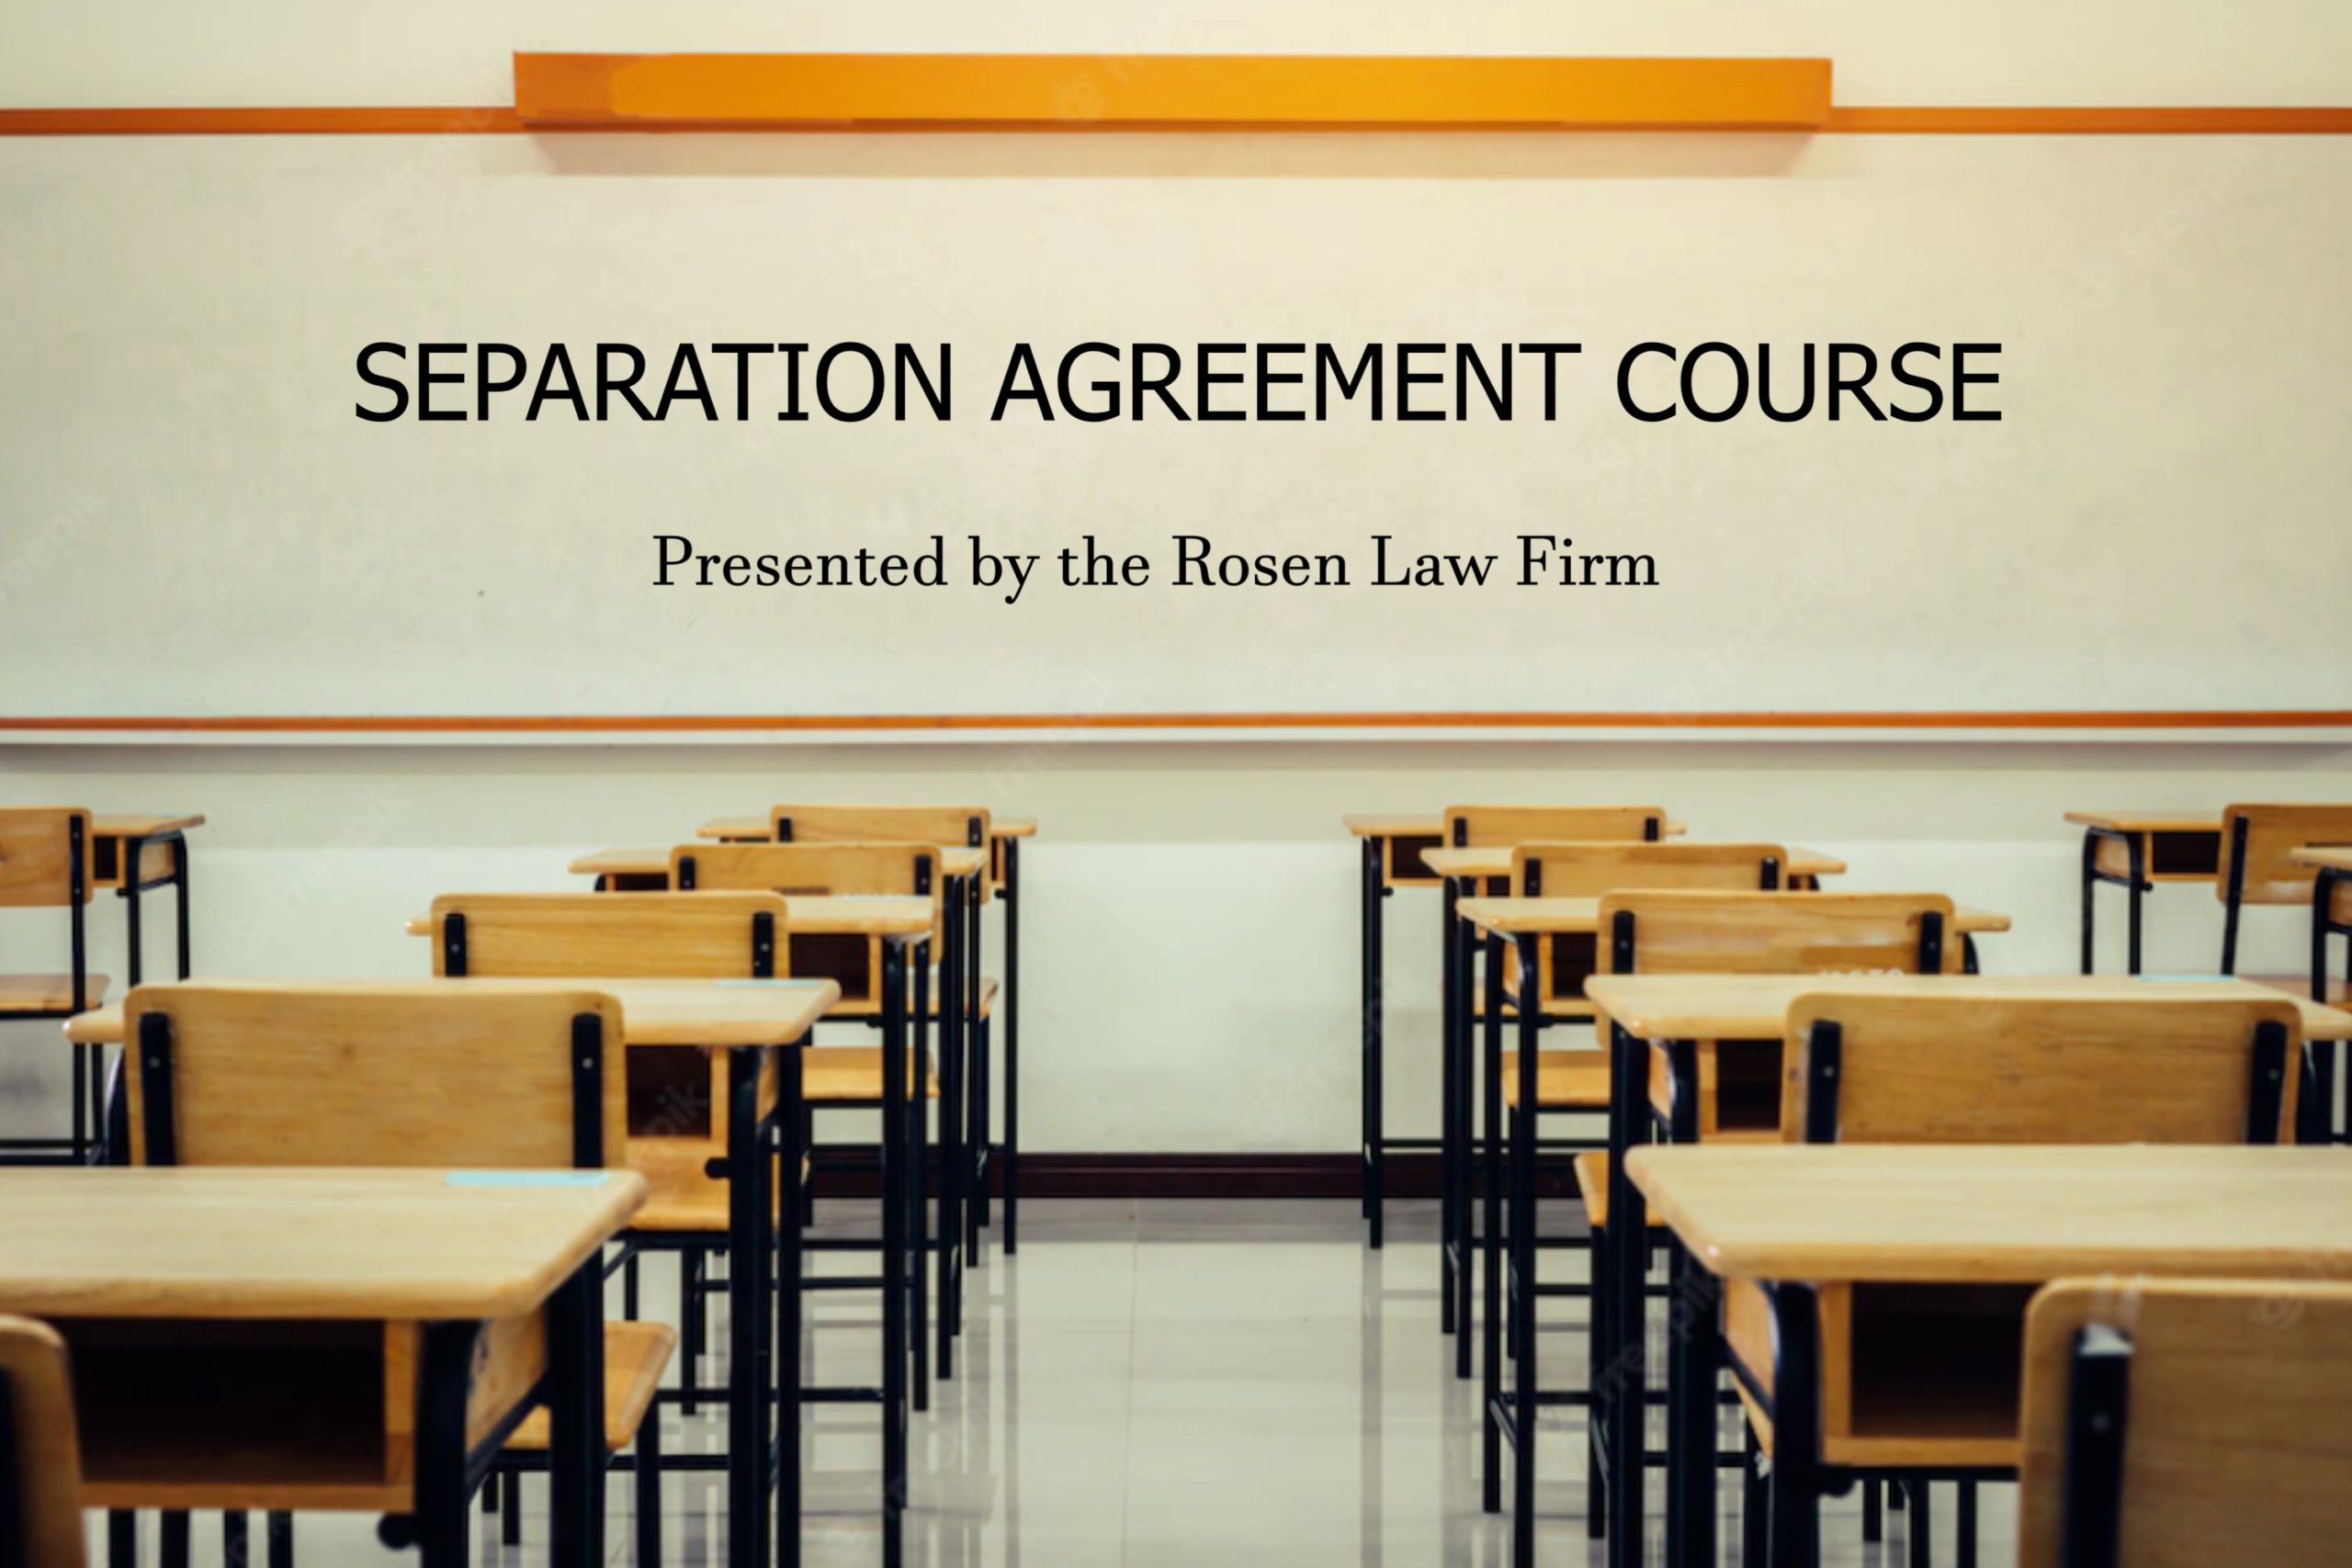 Separation agreement course